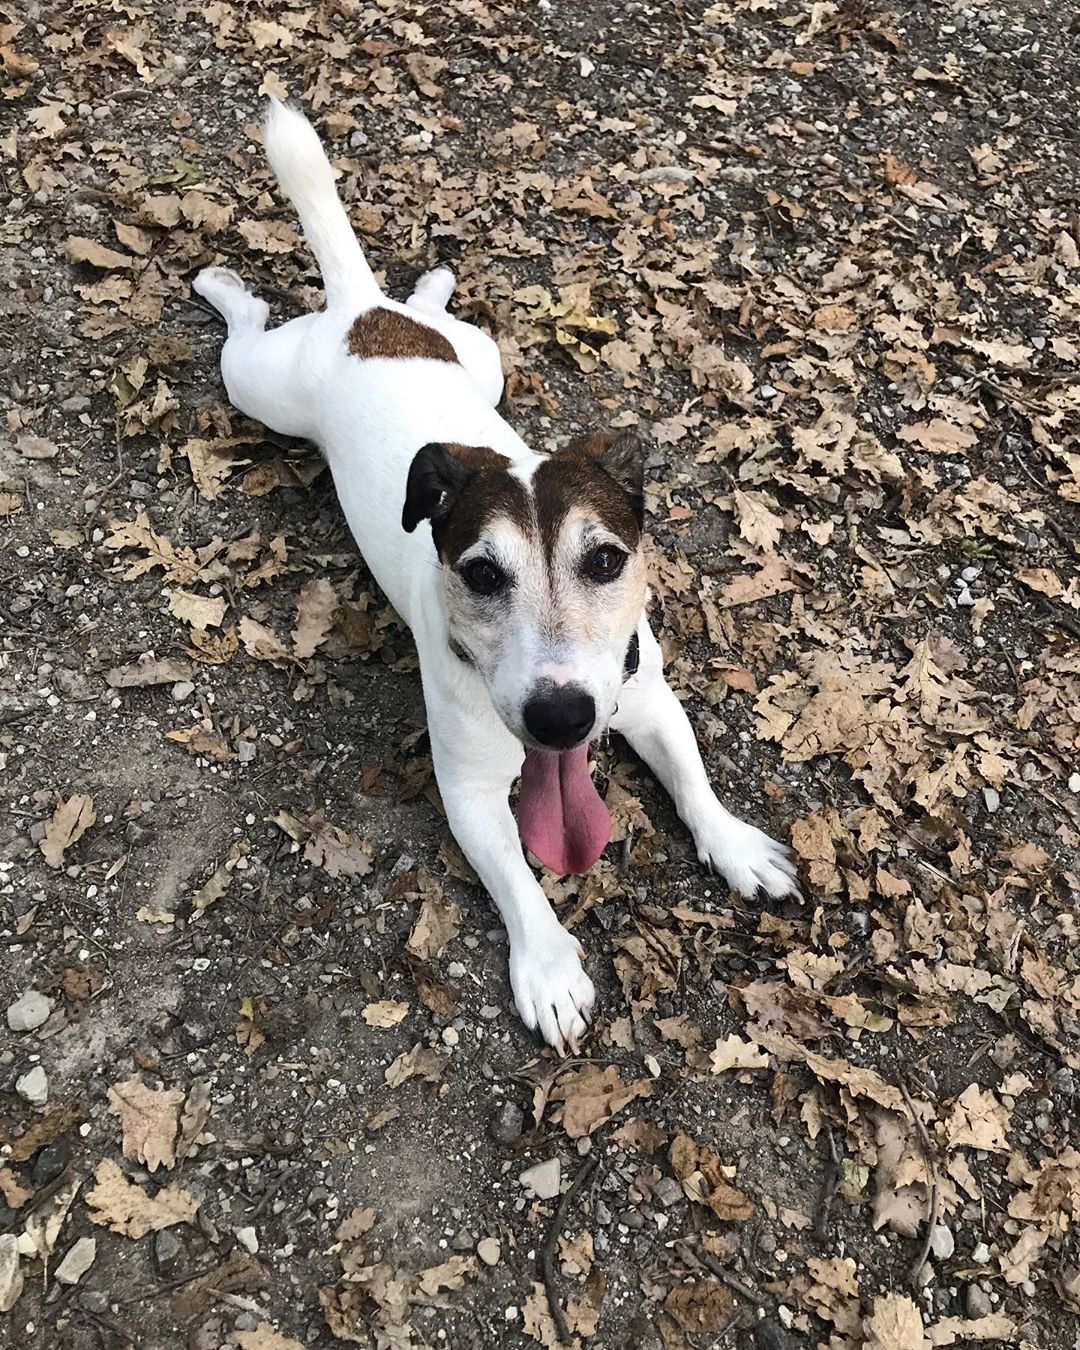 A Jack Russell lying on the ground with its tongue out